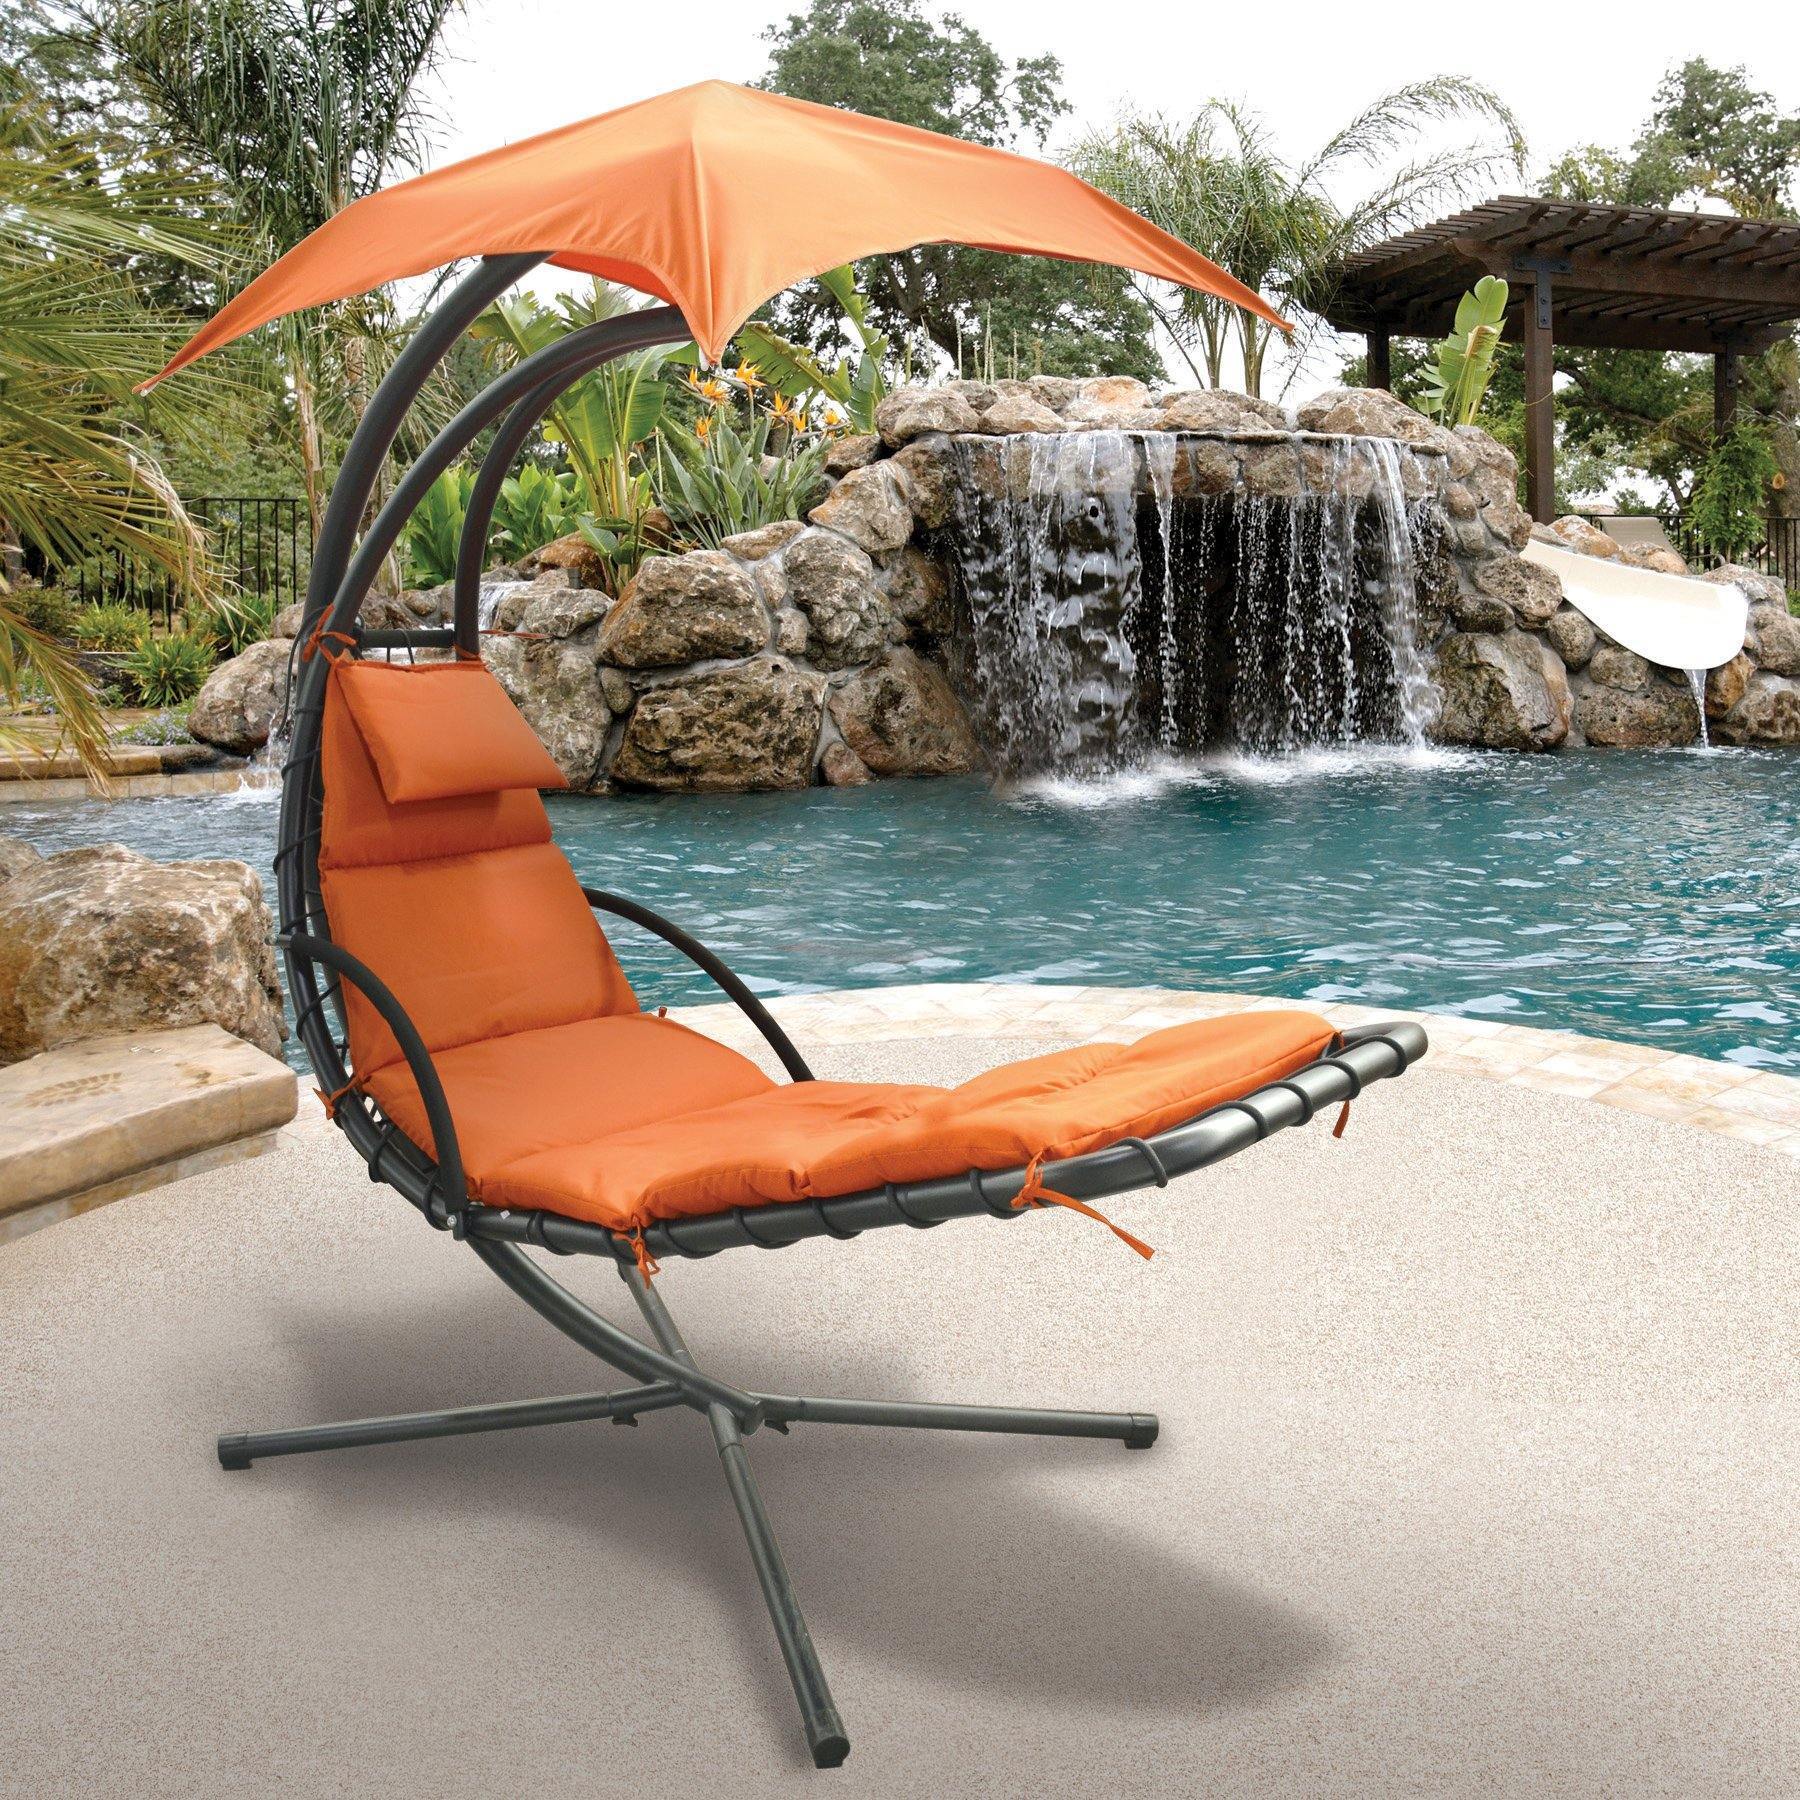 AFD Home Swing Chairs Sky Lounger Terra Cotta